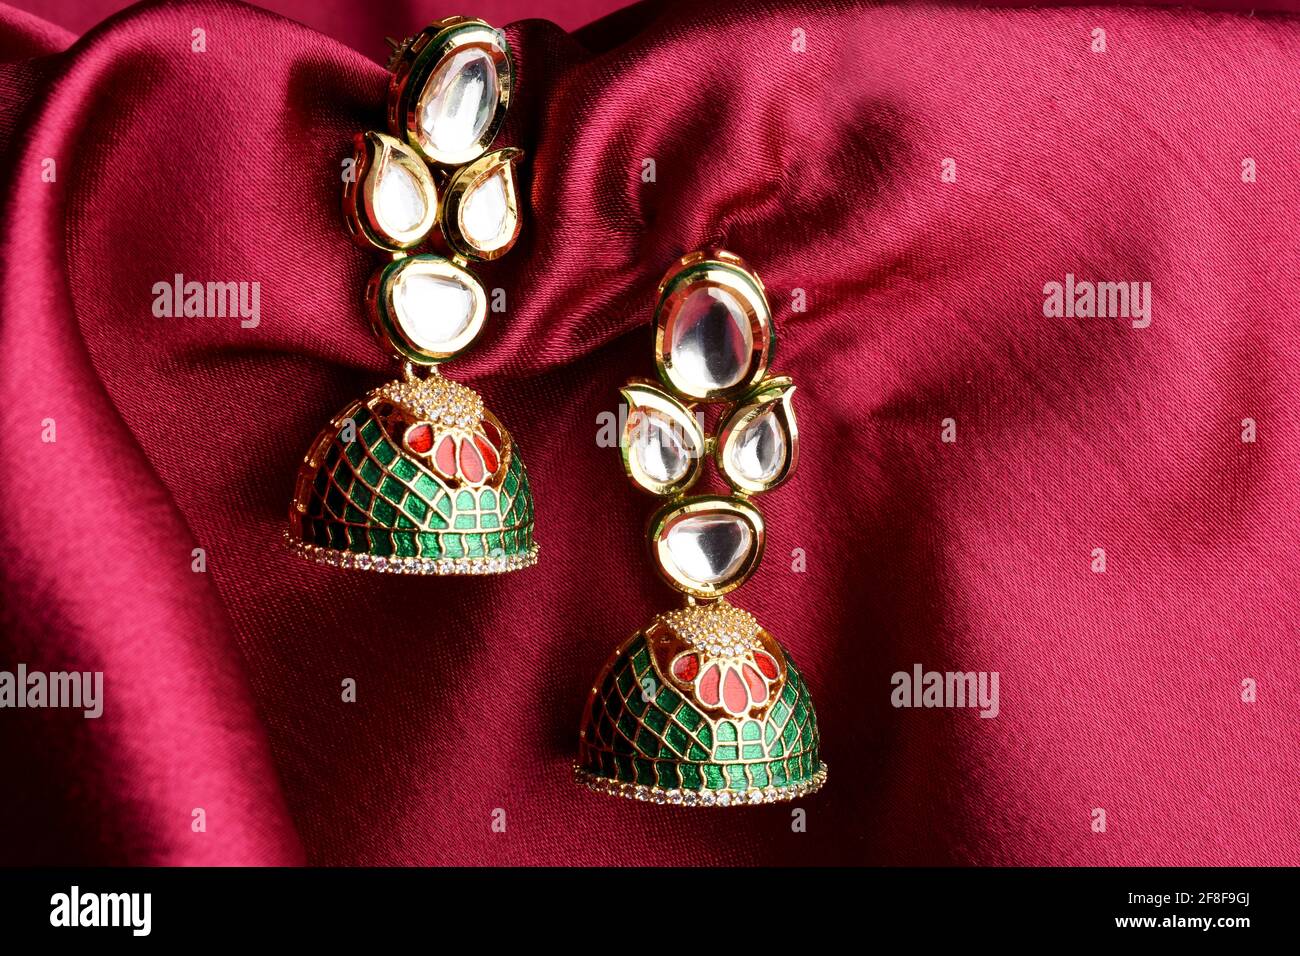 Beautiful Golden pair of earrings Diamonds gemstones on a red satin background Indian traditional jewellery, Bridal Gold earrings wedding jewellery Stock Photo